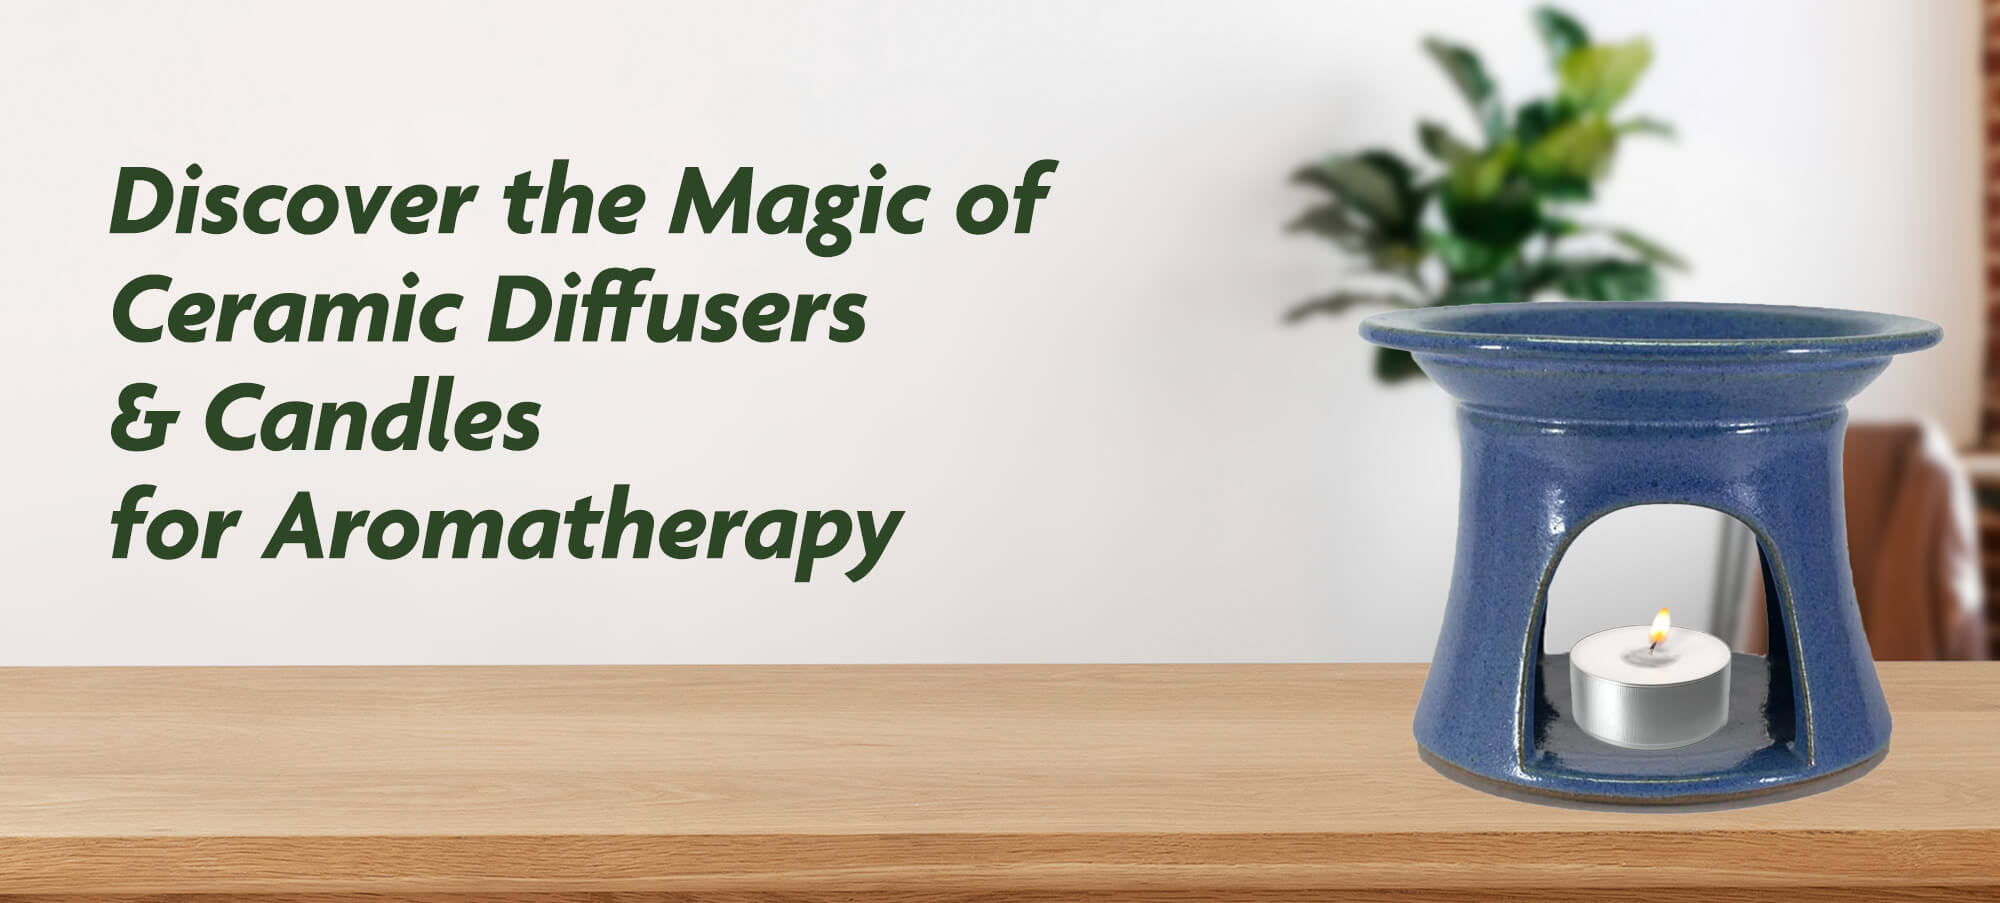 Discover Ceramic Diffusers & Candles for Aromatherapy